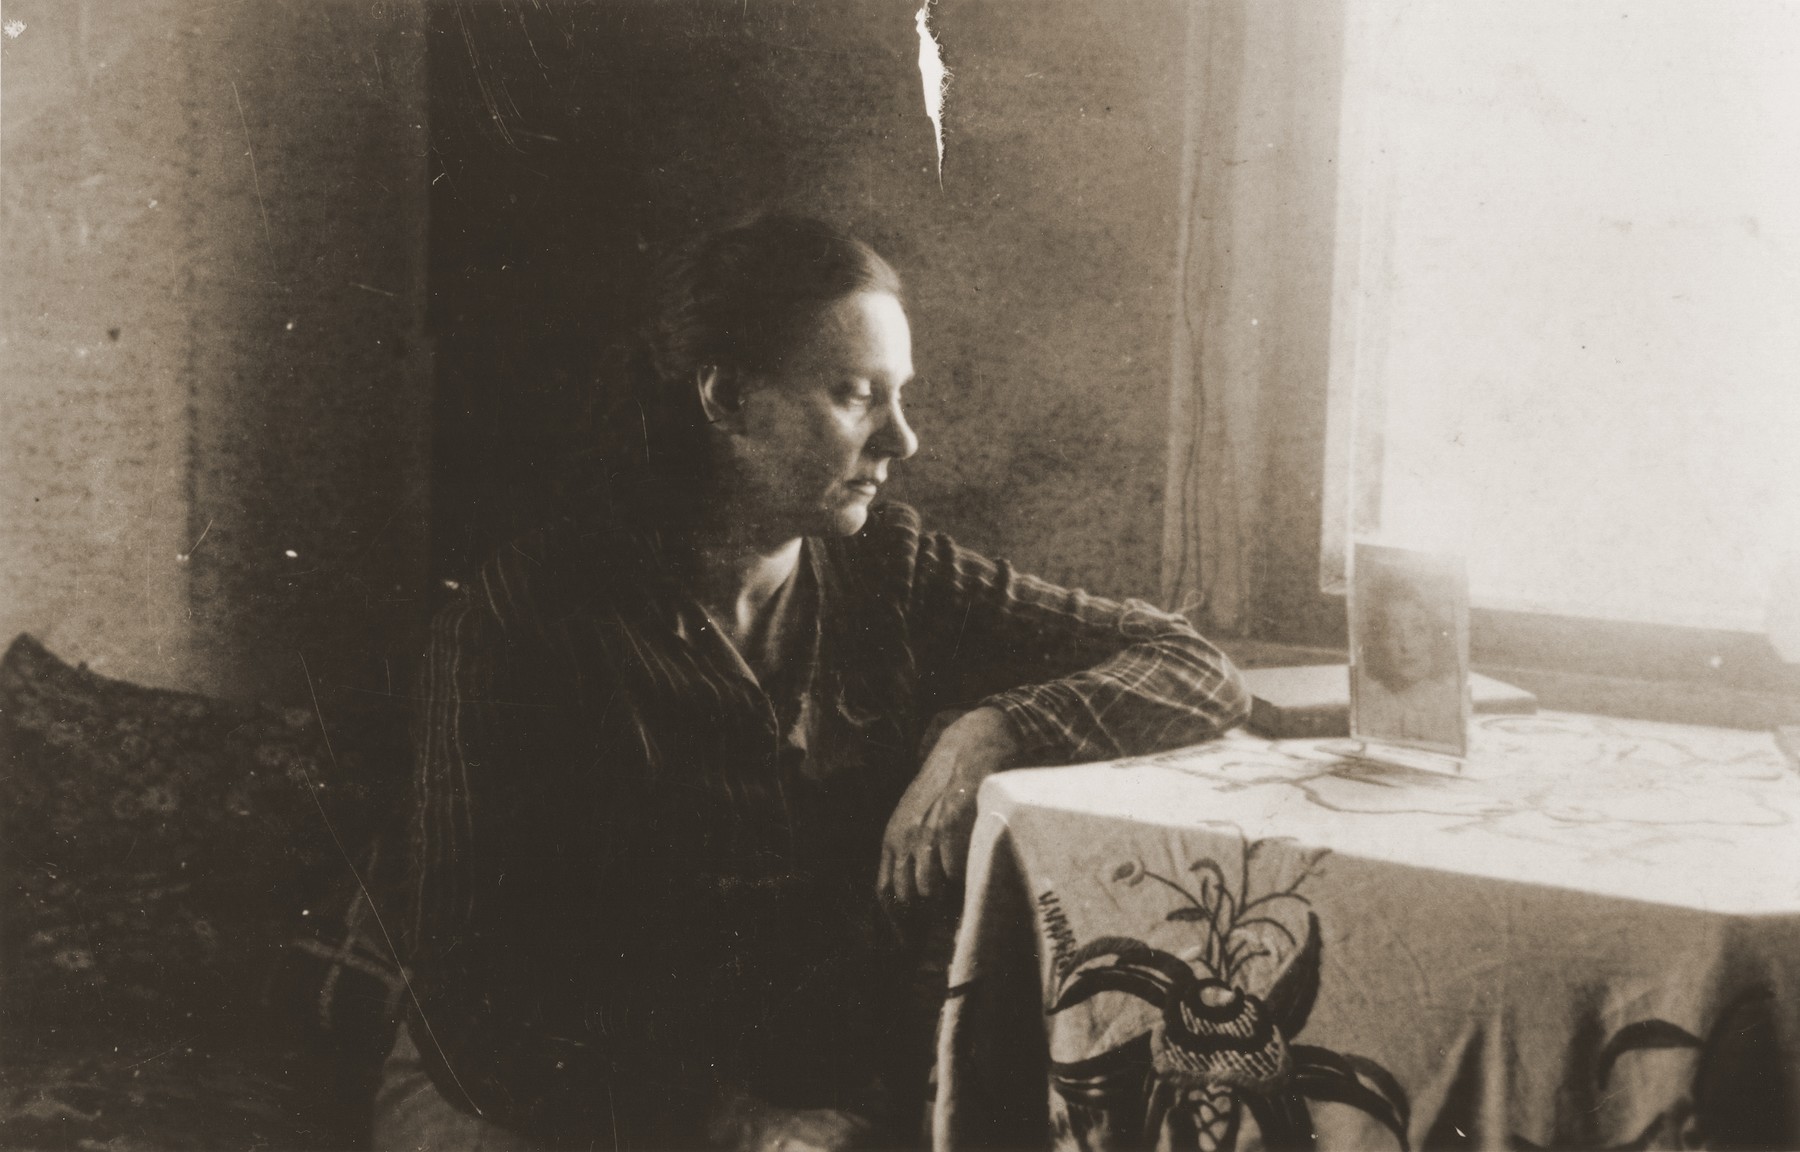 Zoia Bershtanski sits at a table in her room in the Kovno ghetto.

Zoia Bershtanski lived with her married sister, Meri Karnovski, in the ghetto.  Both died in a bunker when the Germans set the ghetto on fire in July 1944.  The photographer, David Ratner, was a friend and a member of the Communist underground.